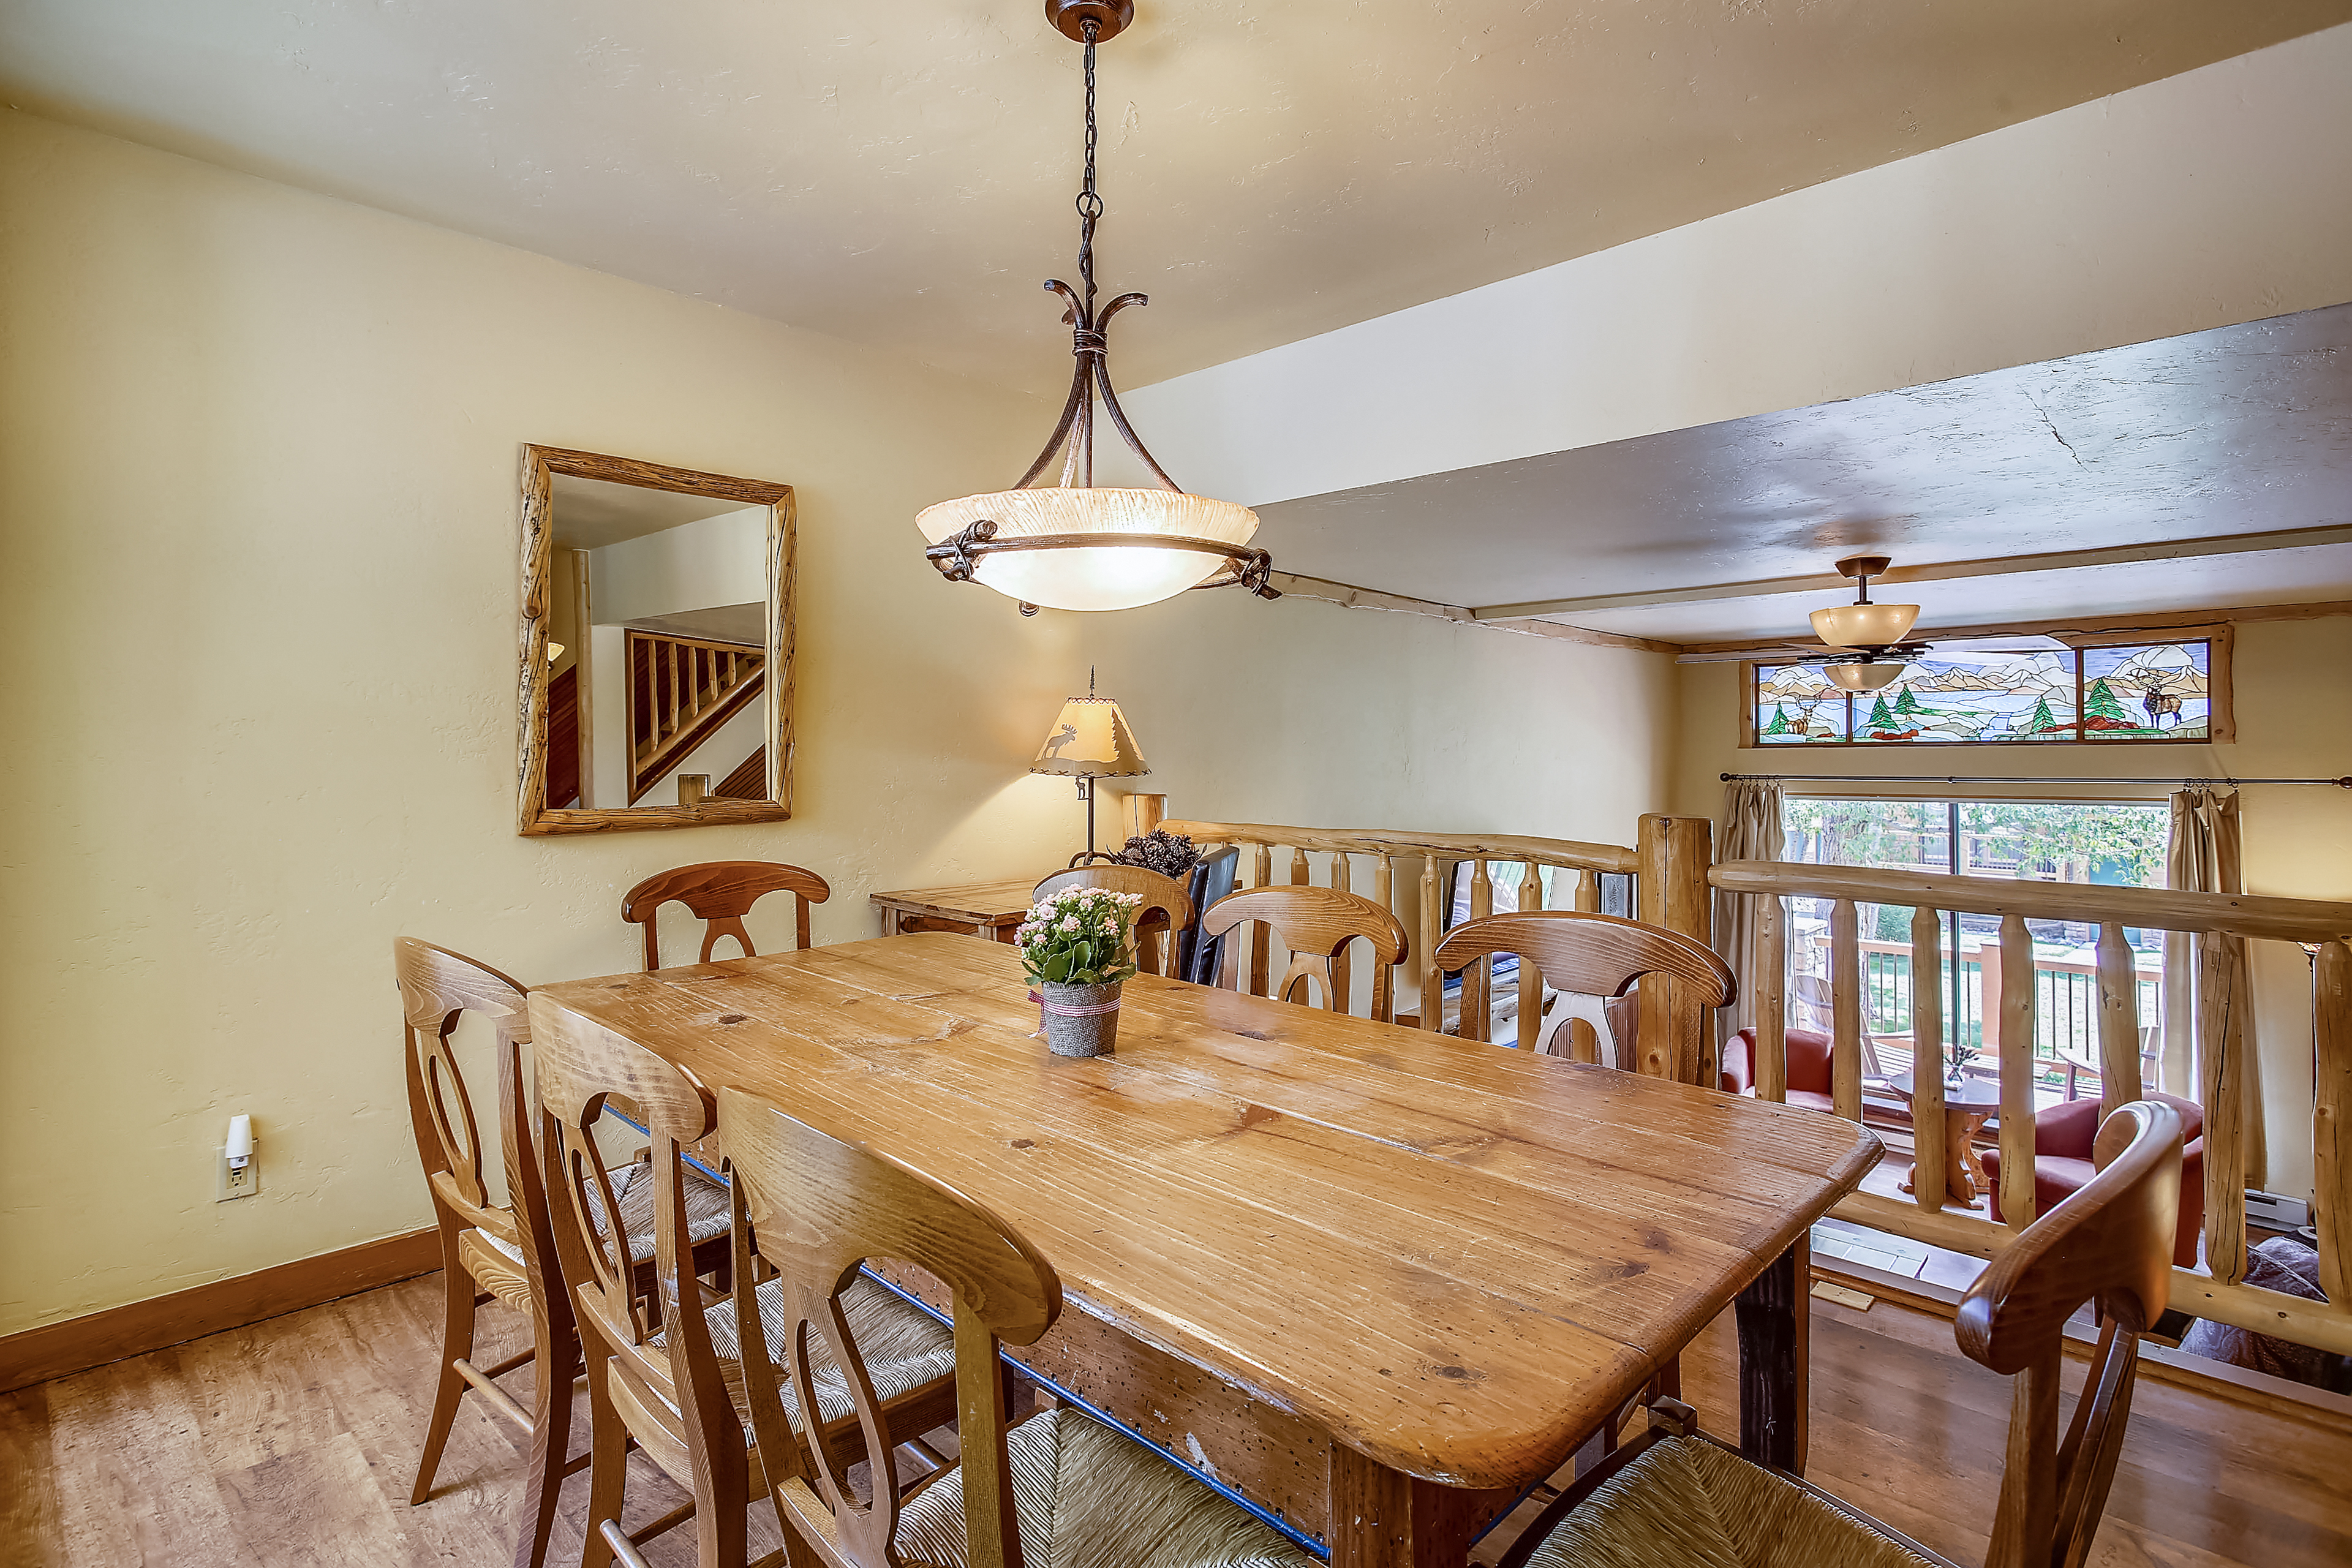 Enjoy a family meal or game night in this dining area - Cedars 53 Breckenridge Vacation Rental